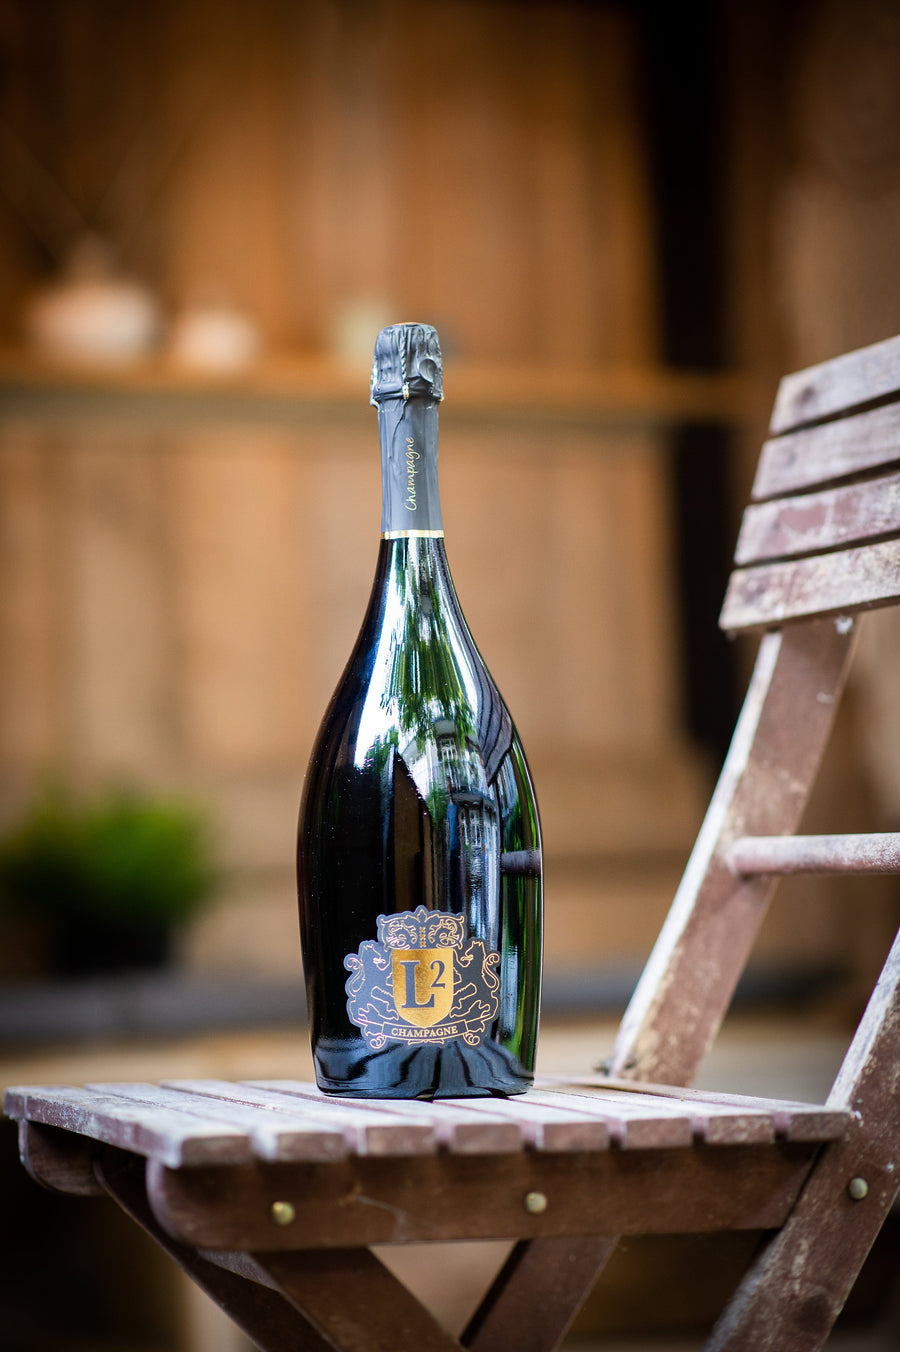 L2 Champagne Golden Lion Extra Brut – Magnum (1500ml)|Sustainable|Ecological